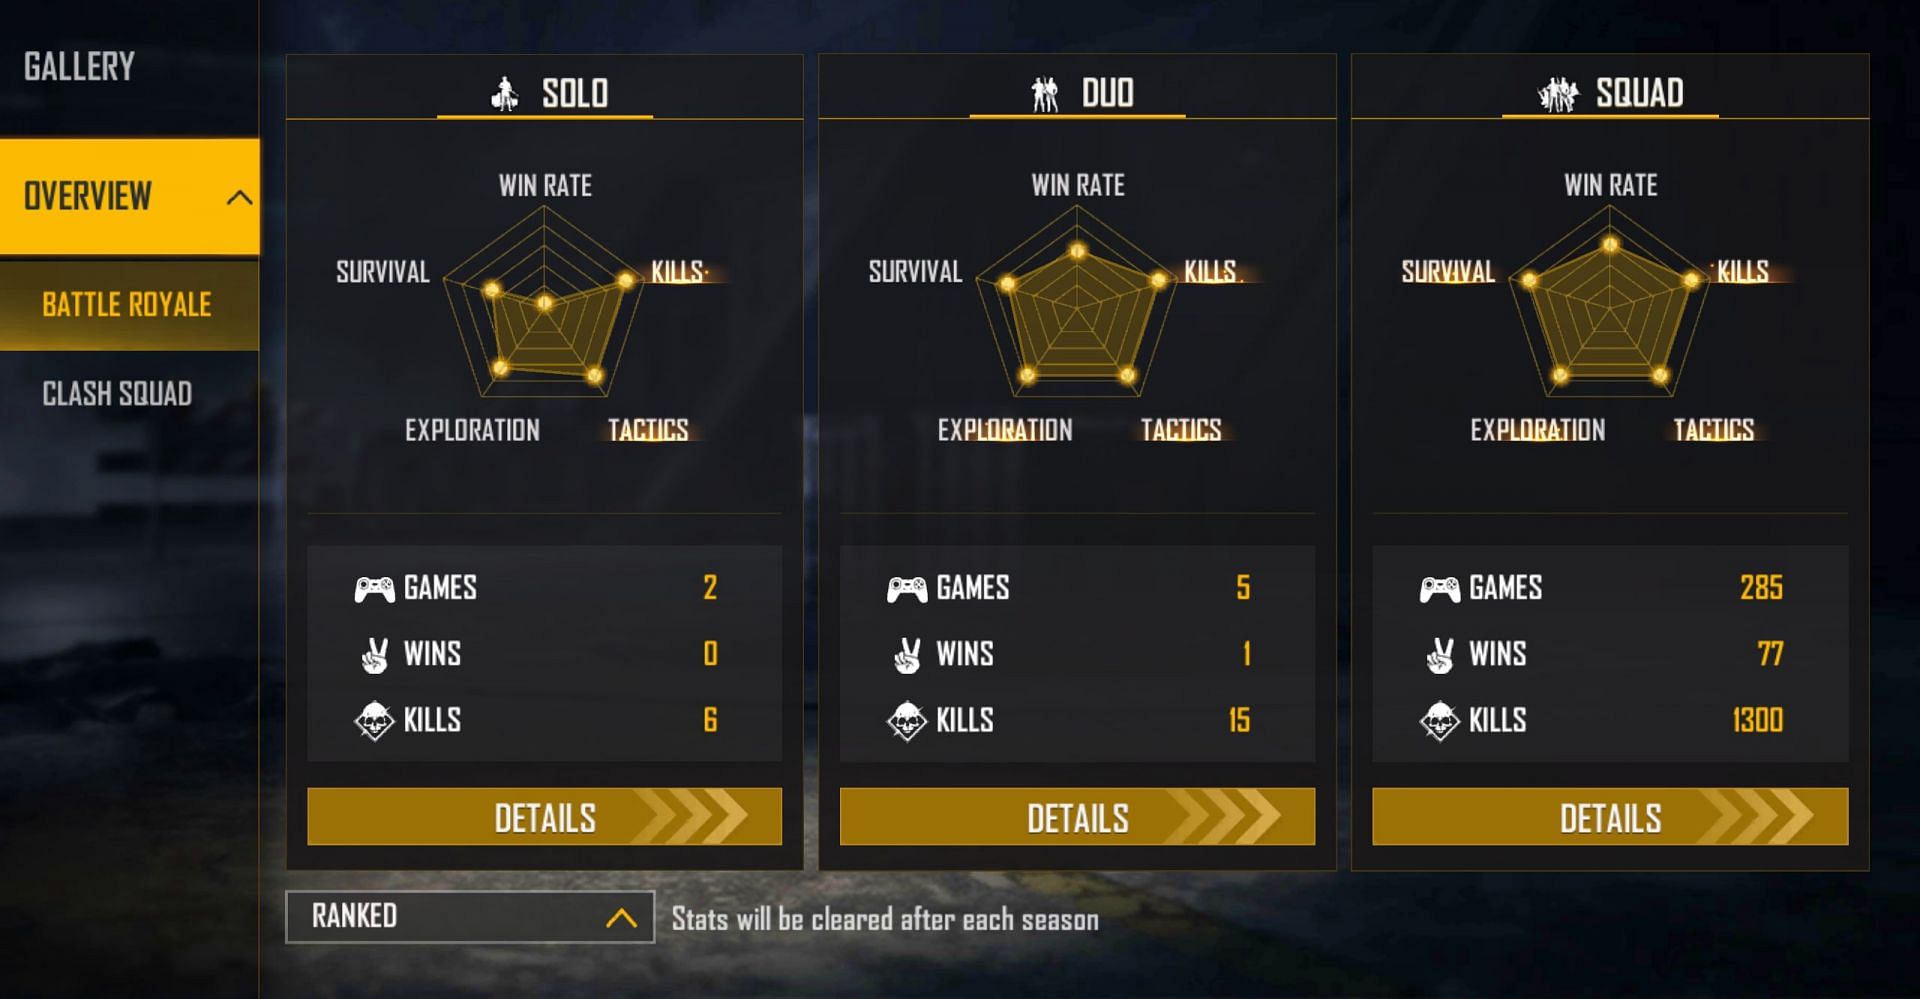 Jonty Gaming has only played 2 solo matches (Image via Free Fire)